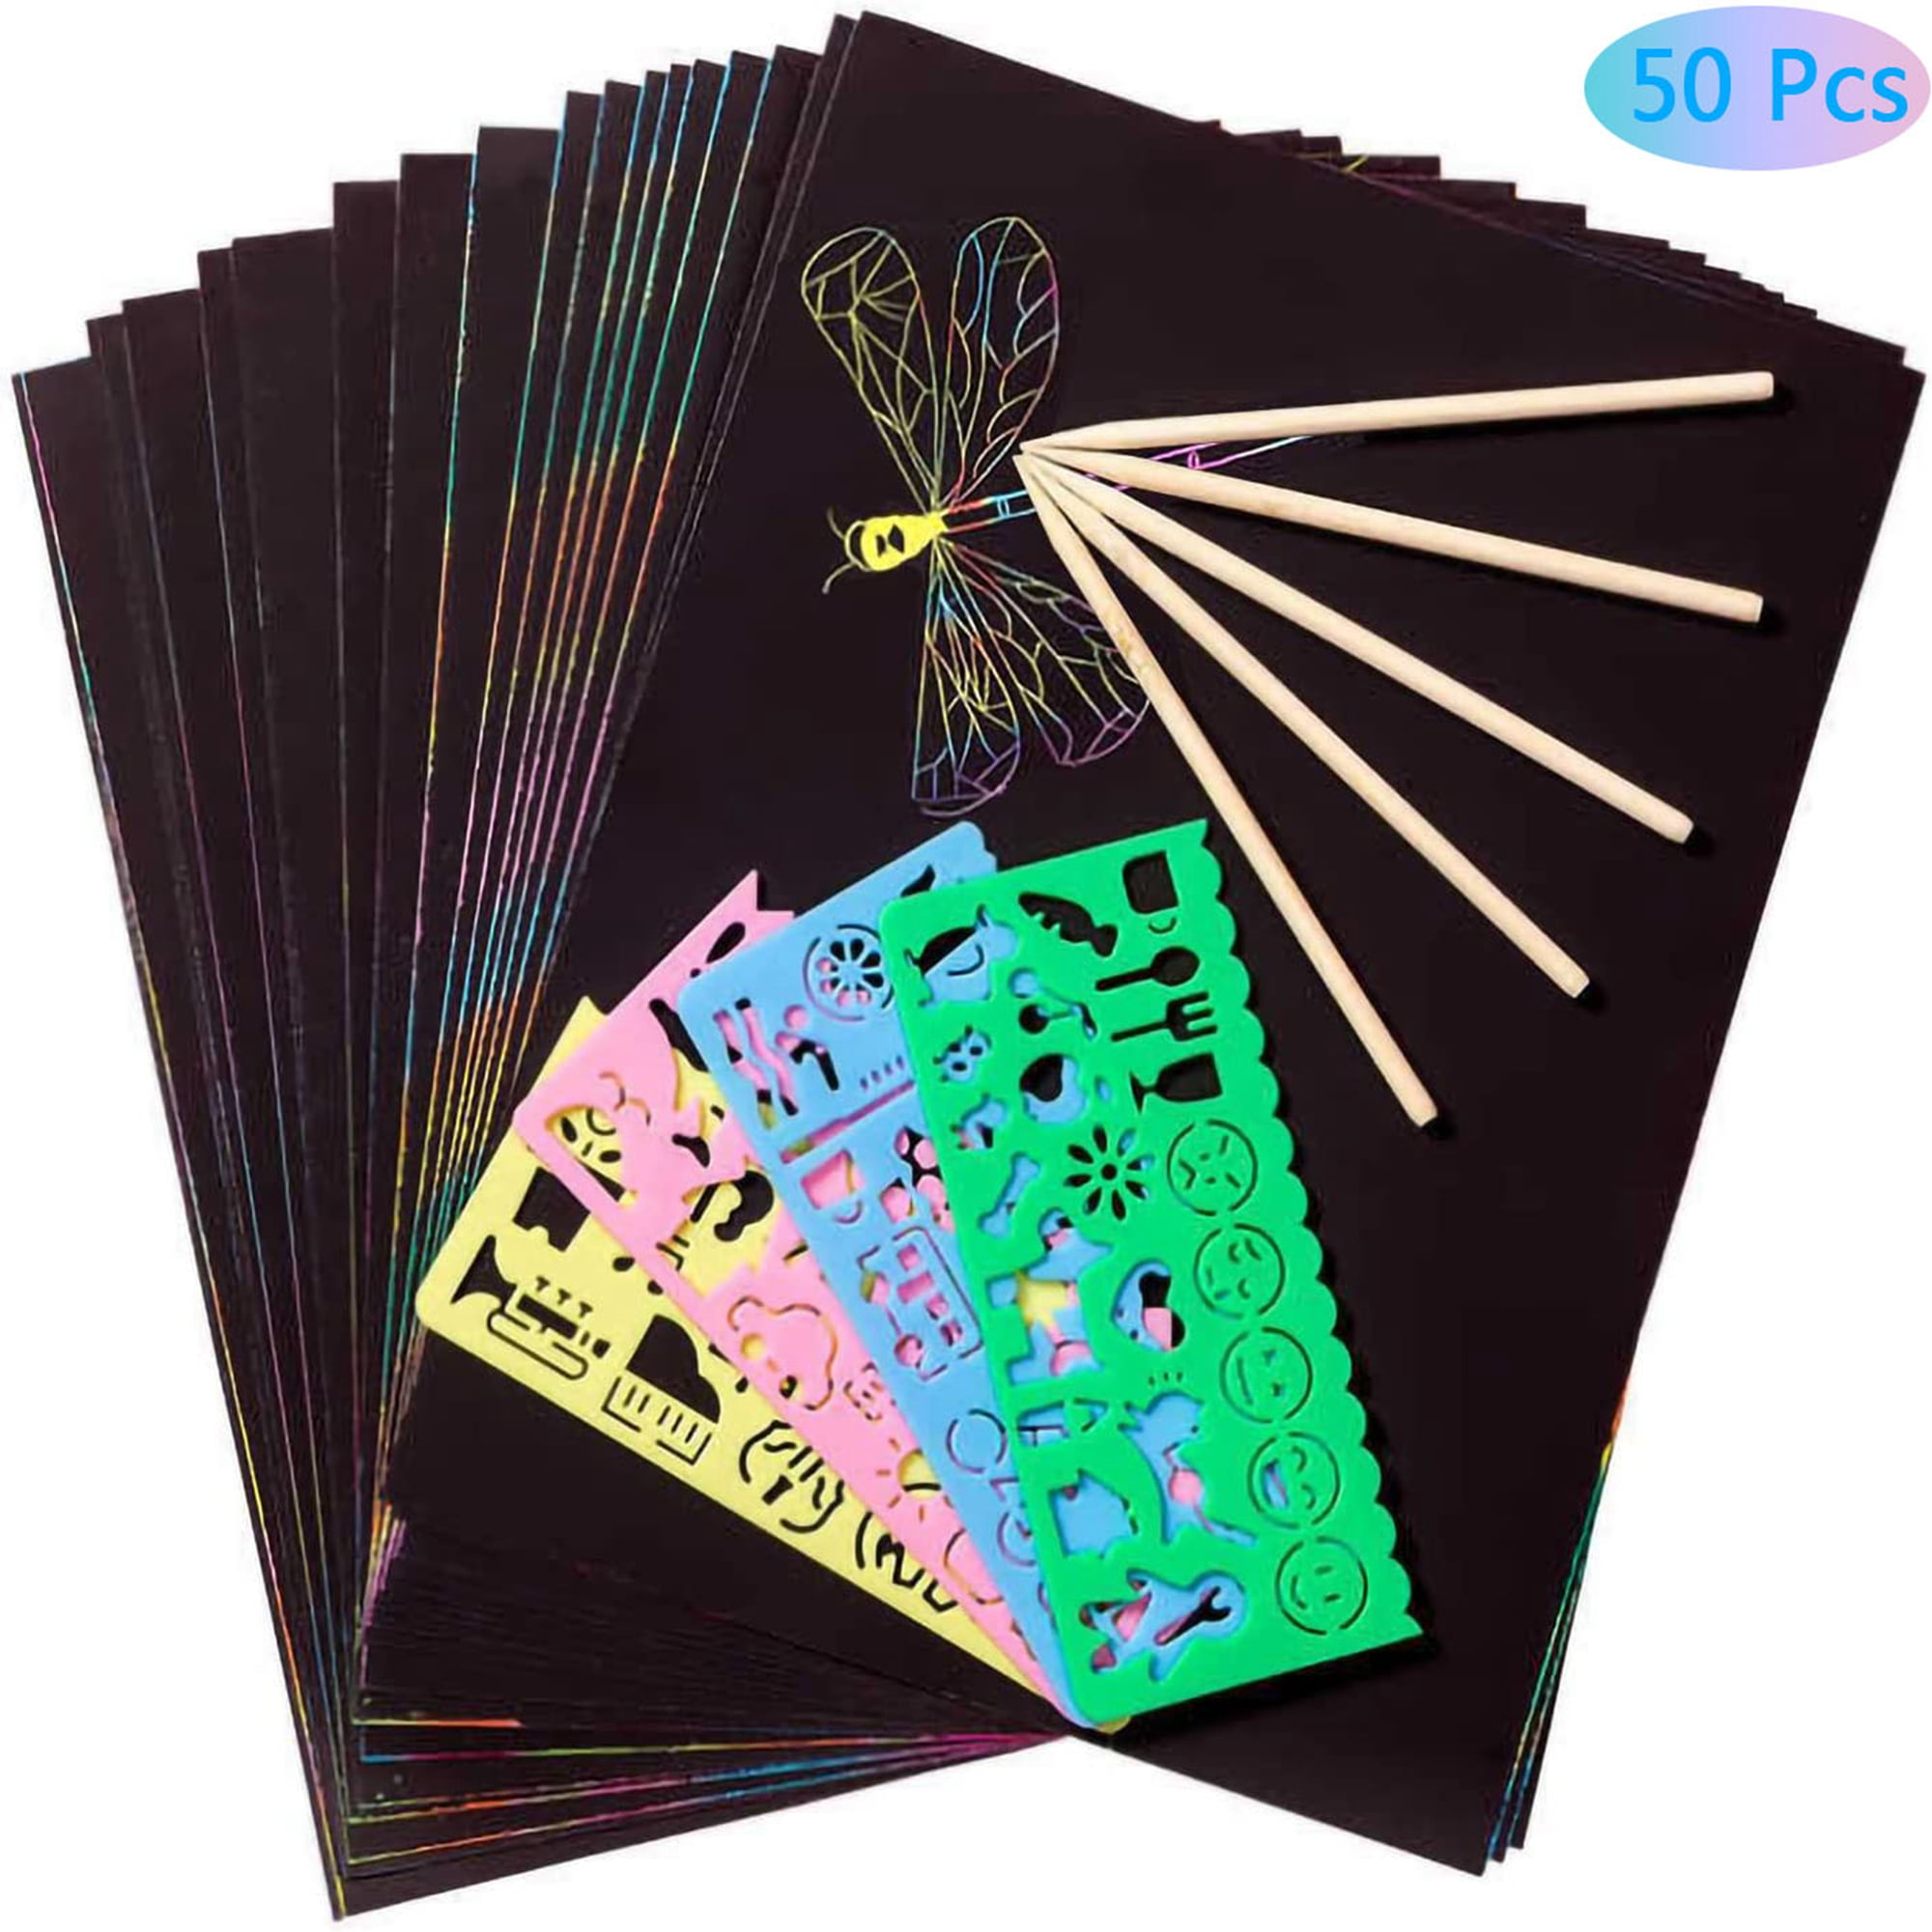 VHALE Foil Art Craft Kit Sticker Picture, Peel and Paste Sparkly Foil Art,  Classroom Arts and Crafts, 6 Packs